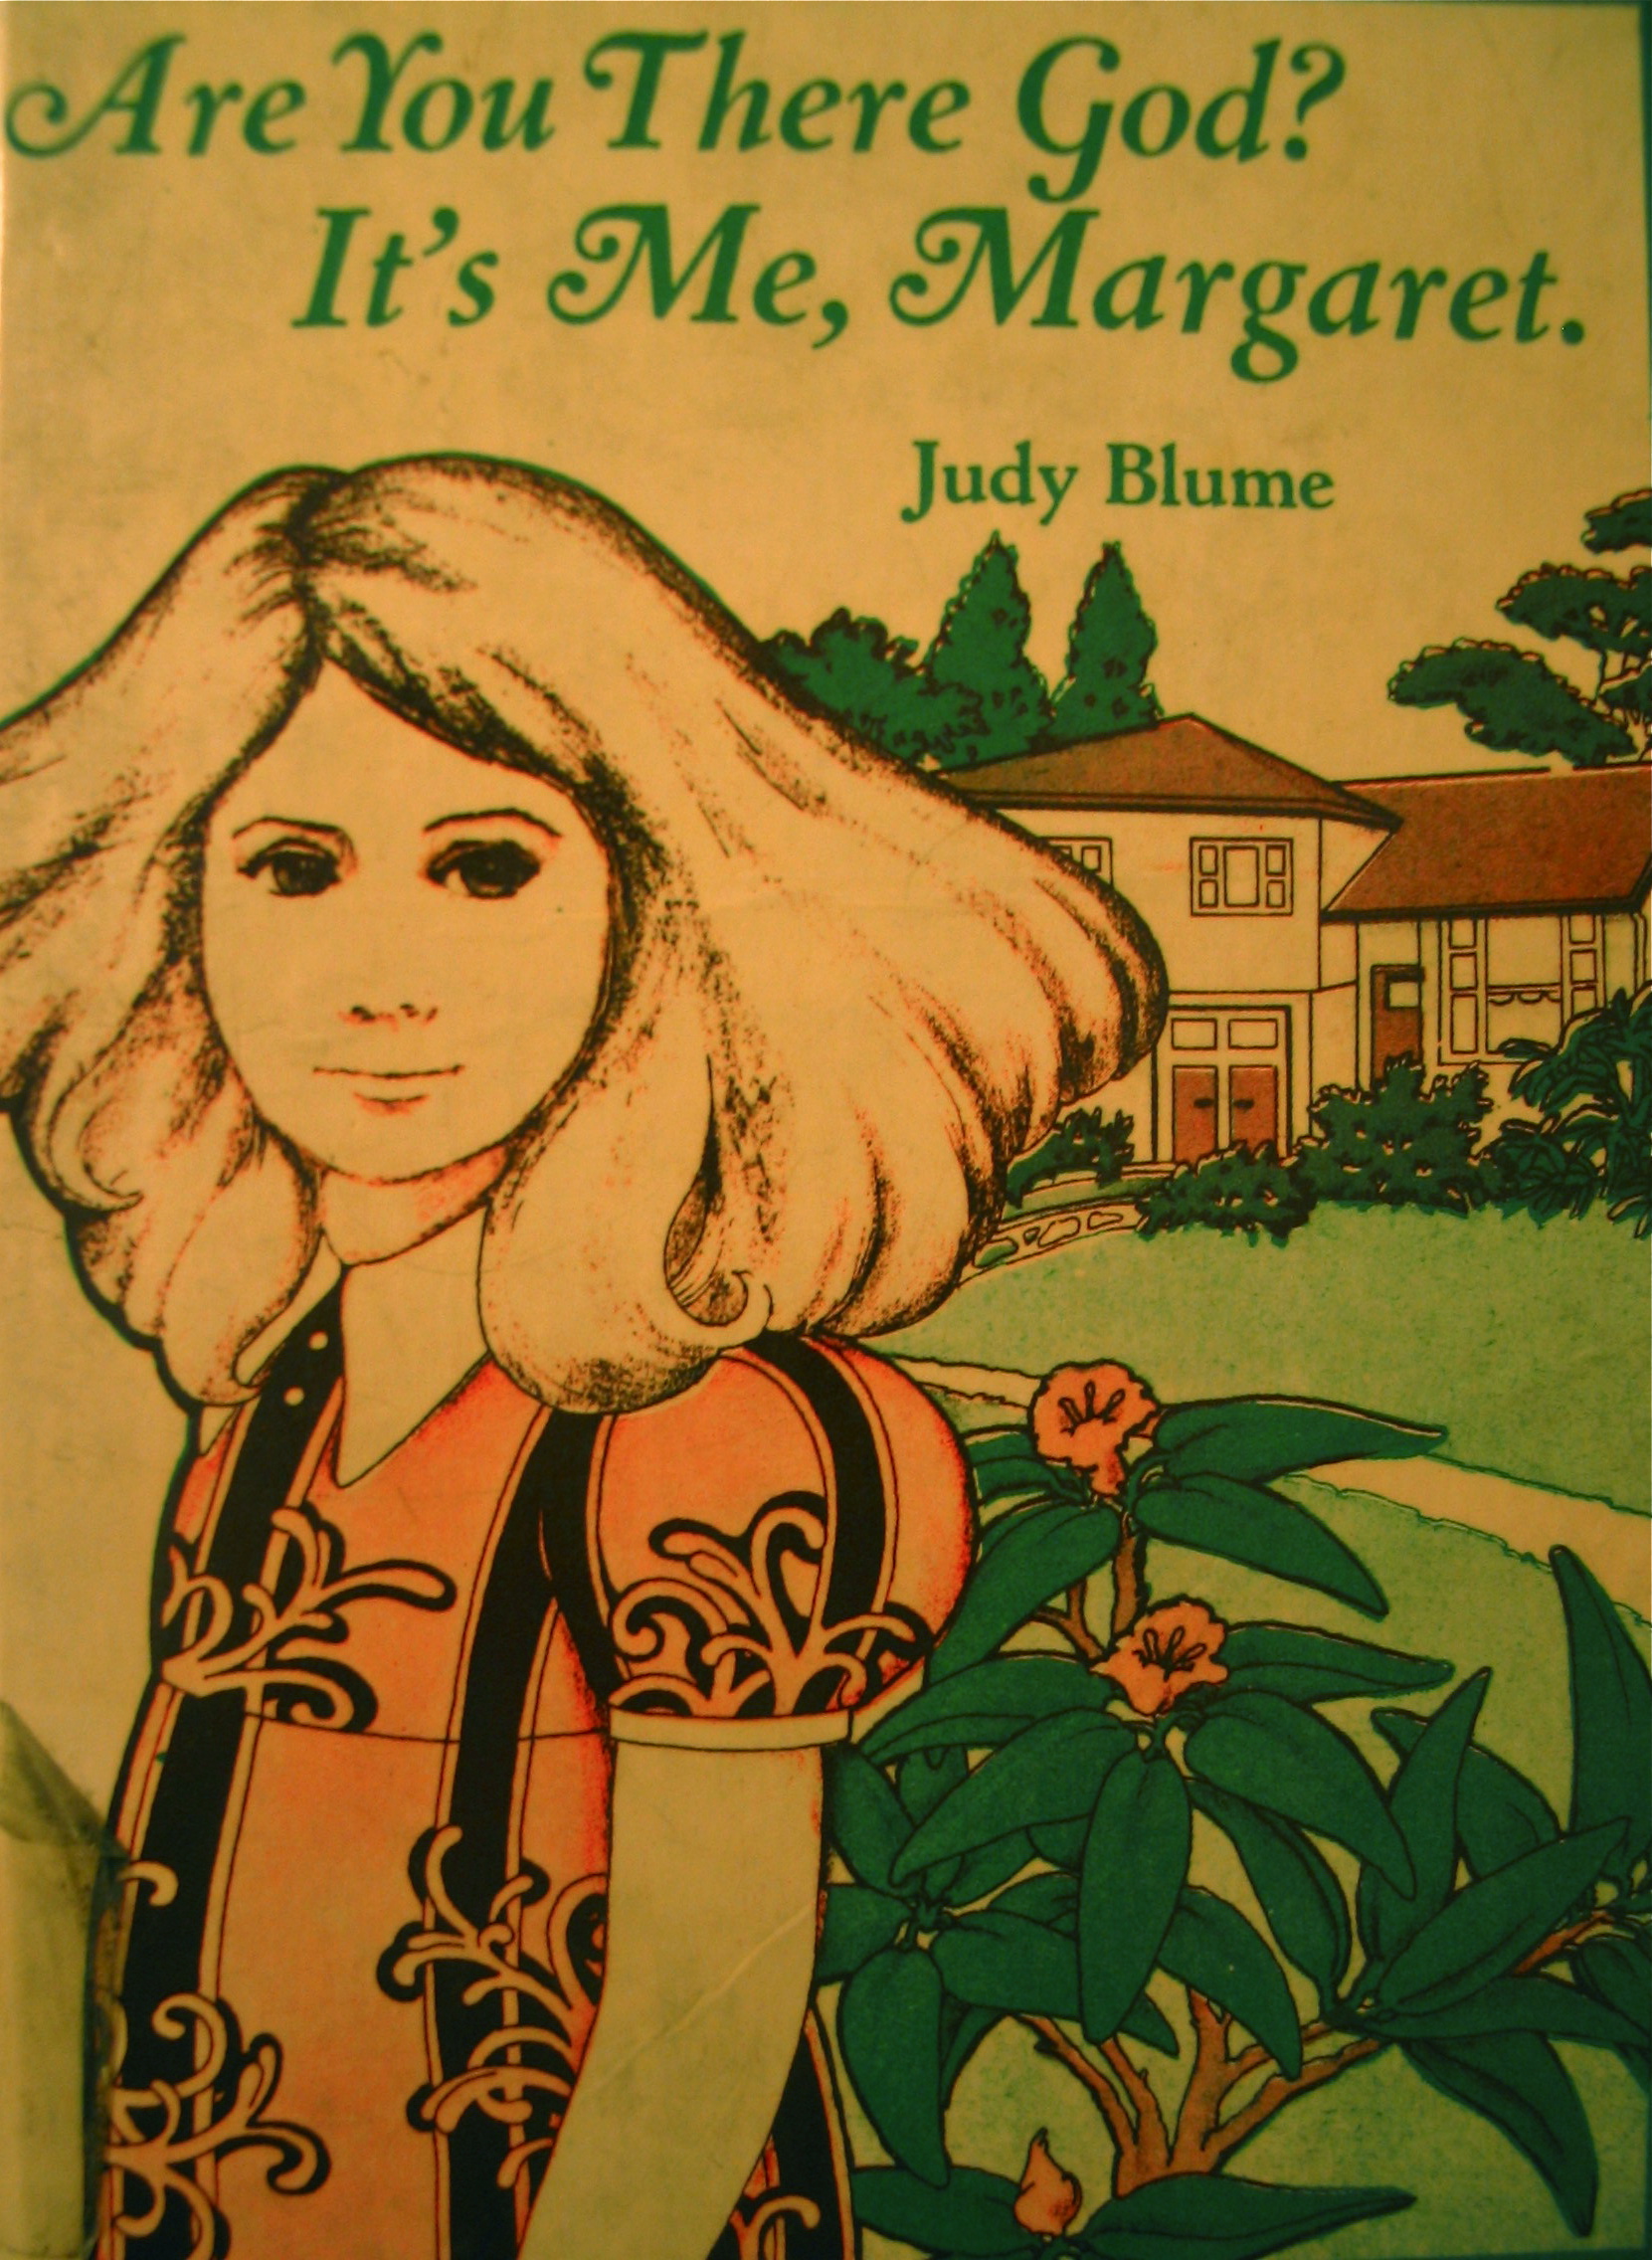 Are You There God? It's Me, Margaret, by Judy Blume